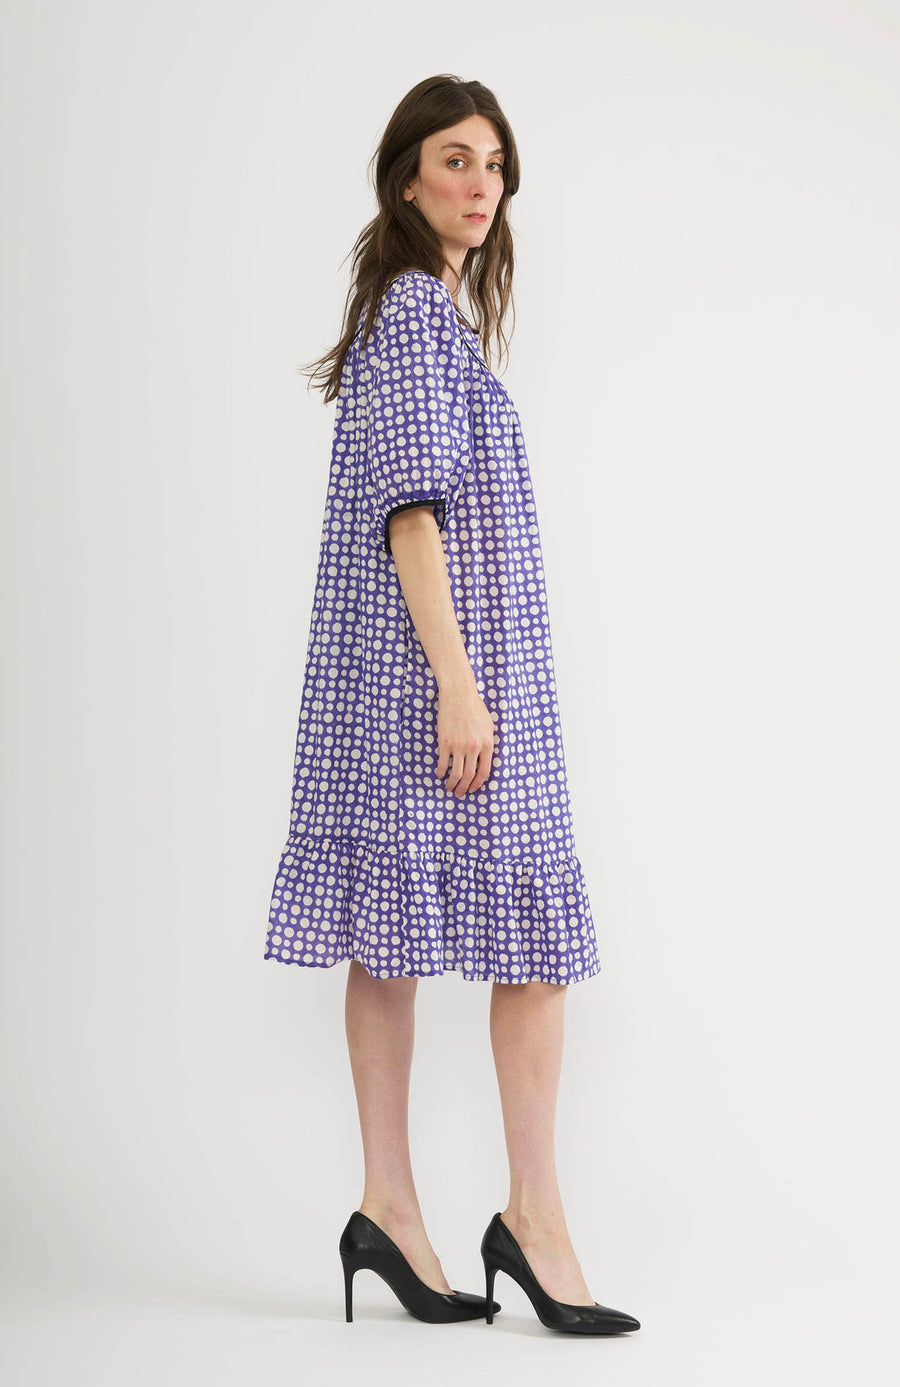 Snap Housedress in Blue Dots